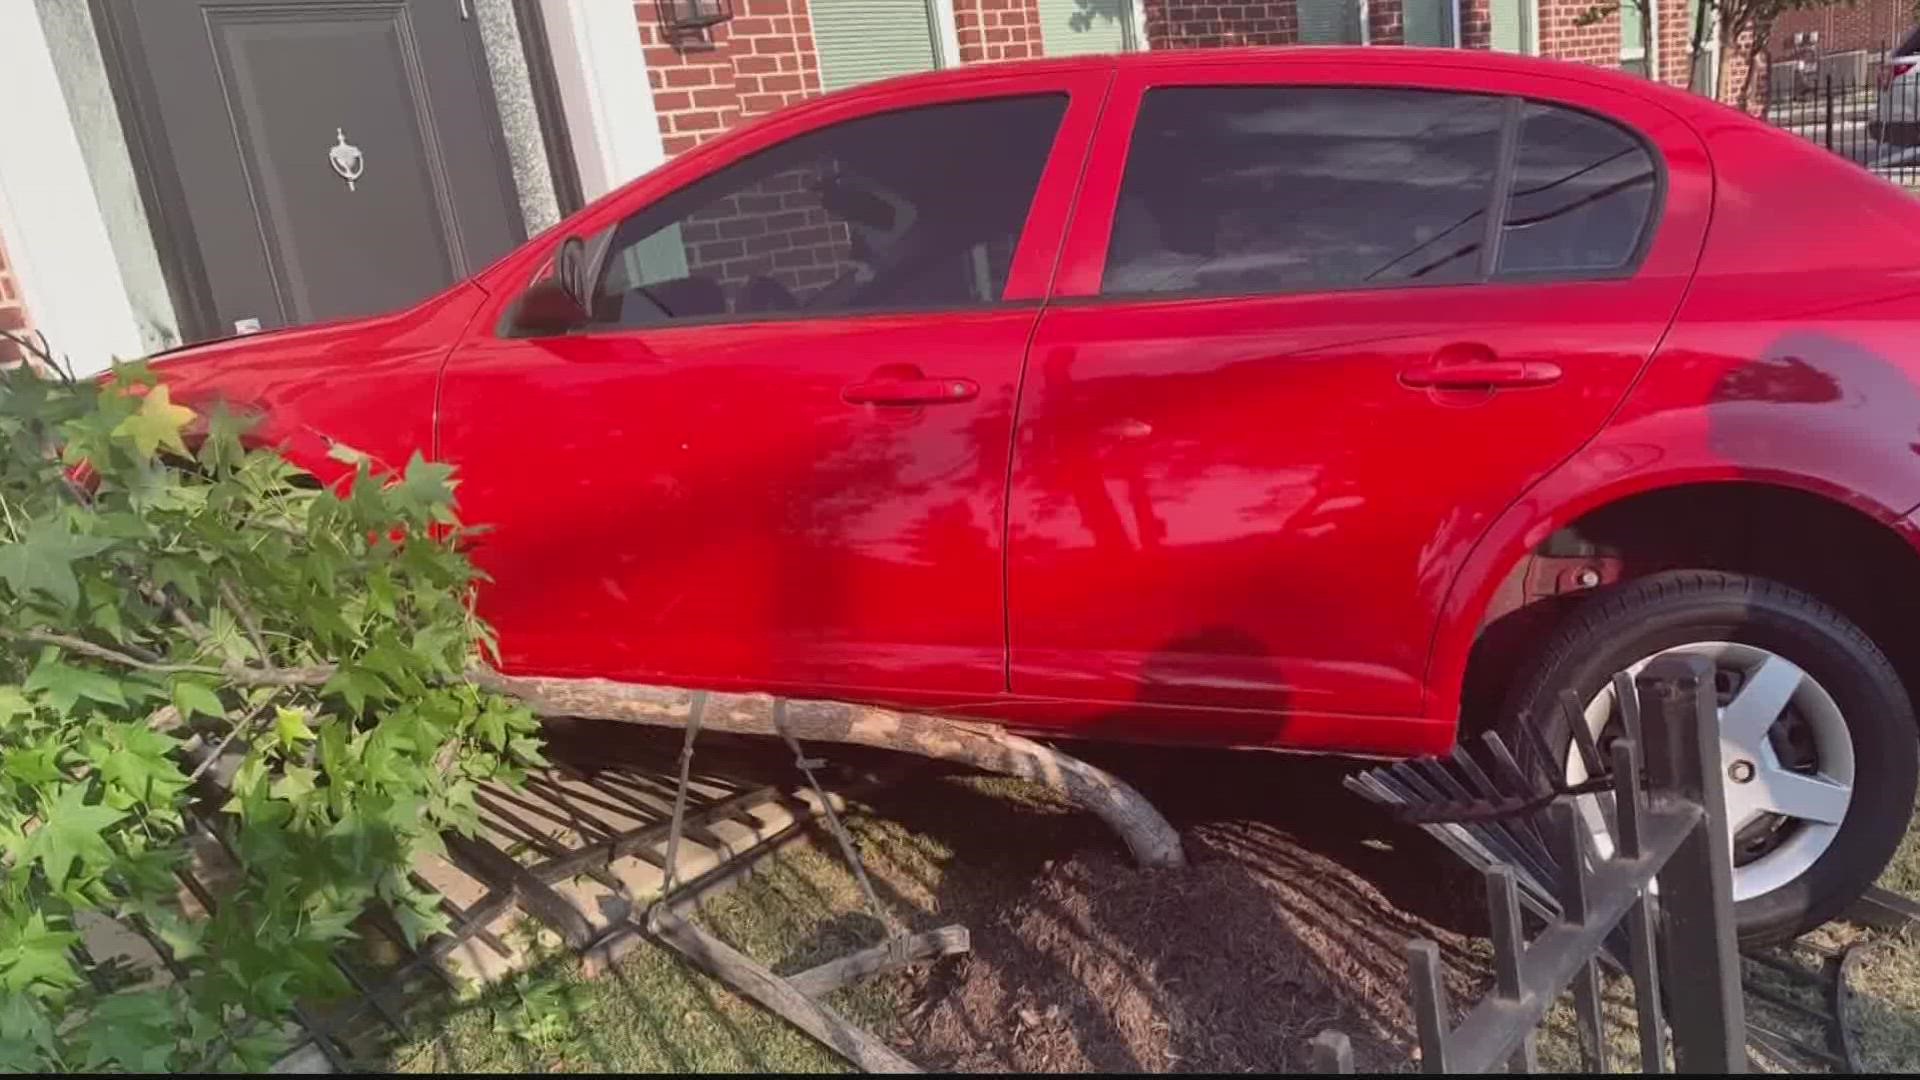 Neighbors on one Southeast DC street are pleading with DC's department of transportation for help.
This after they say another driver crashed into someone's yard.